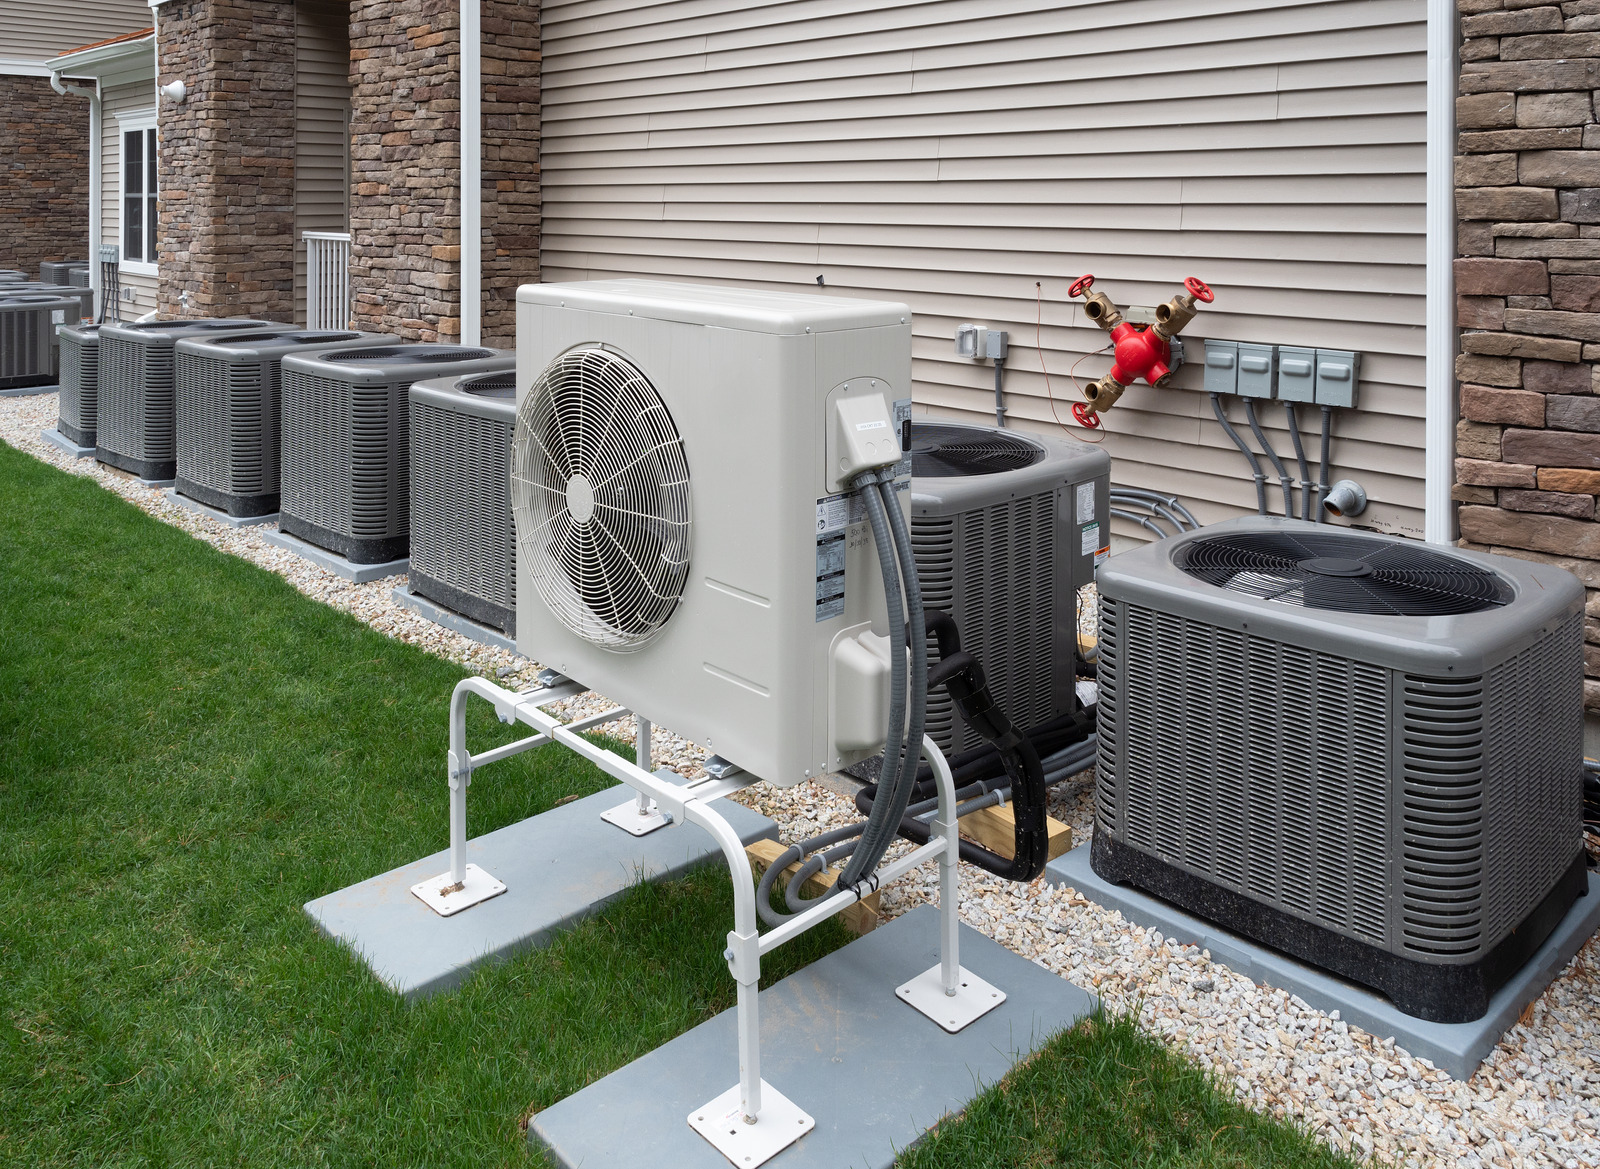 The image shows an installed heat pump or air conditioner.